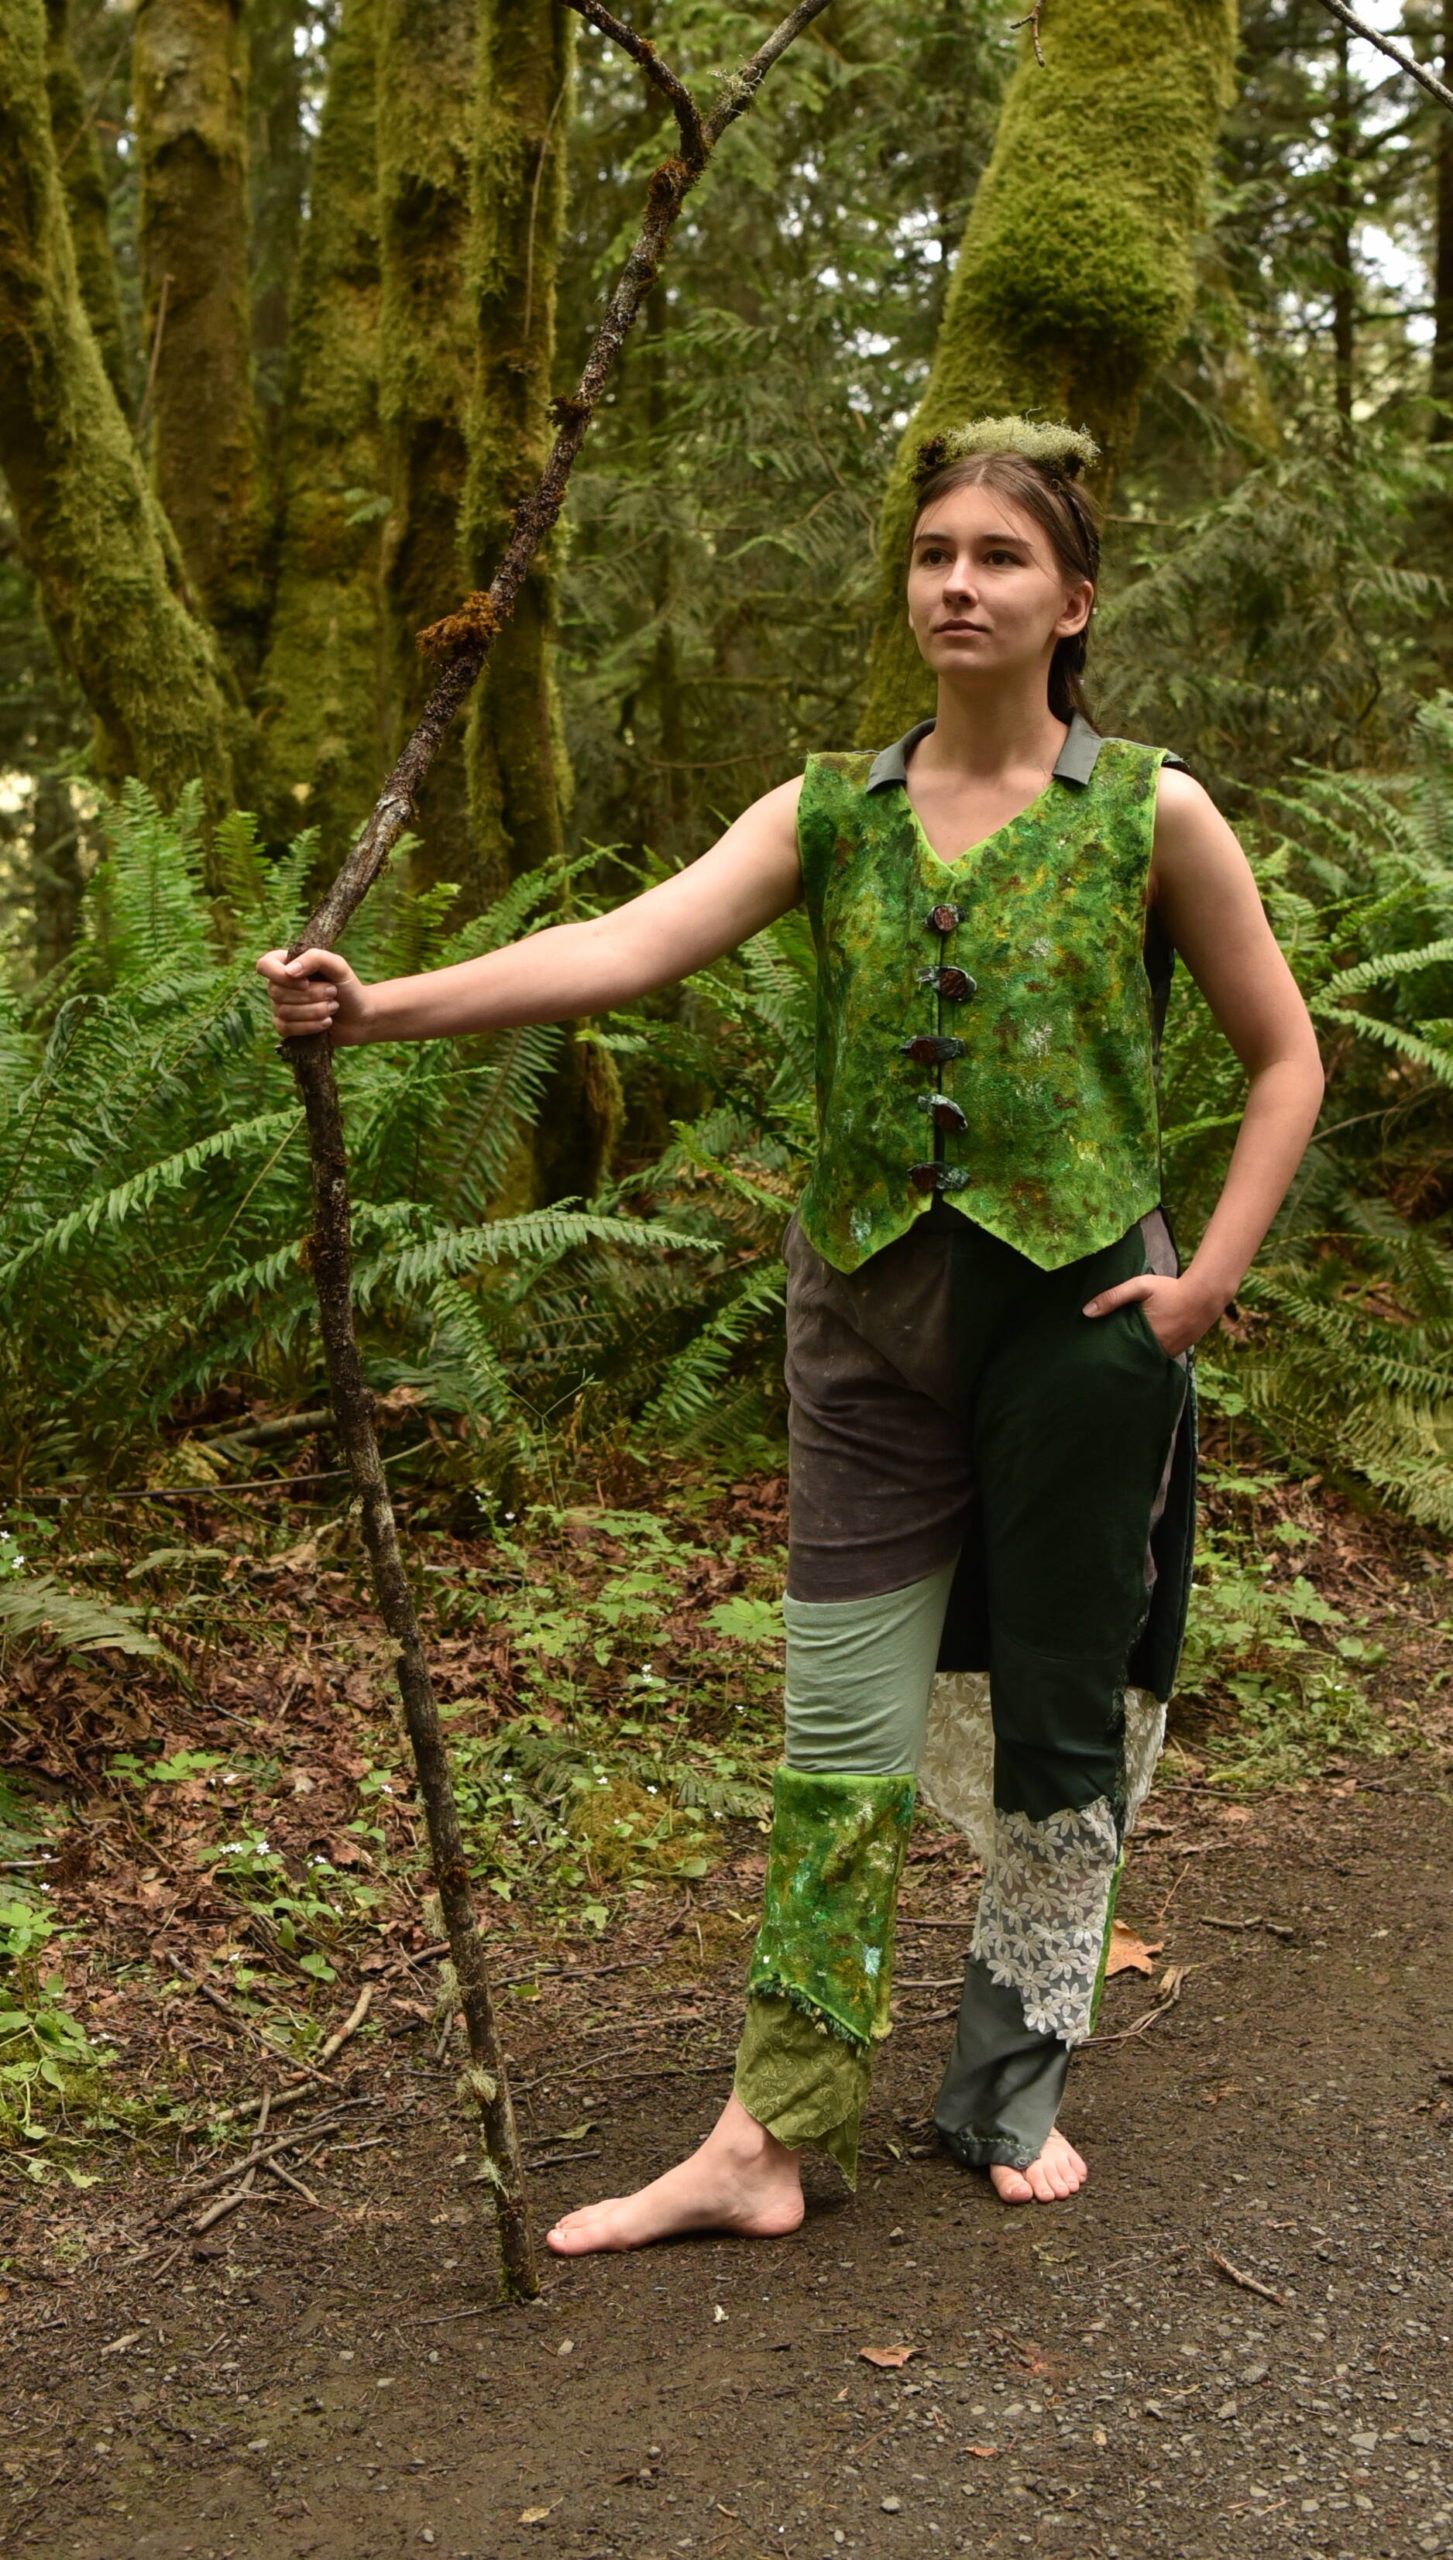 Sann Wilder modeled The Moss Prince refashion entry designed by Lily Lashmet.